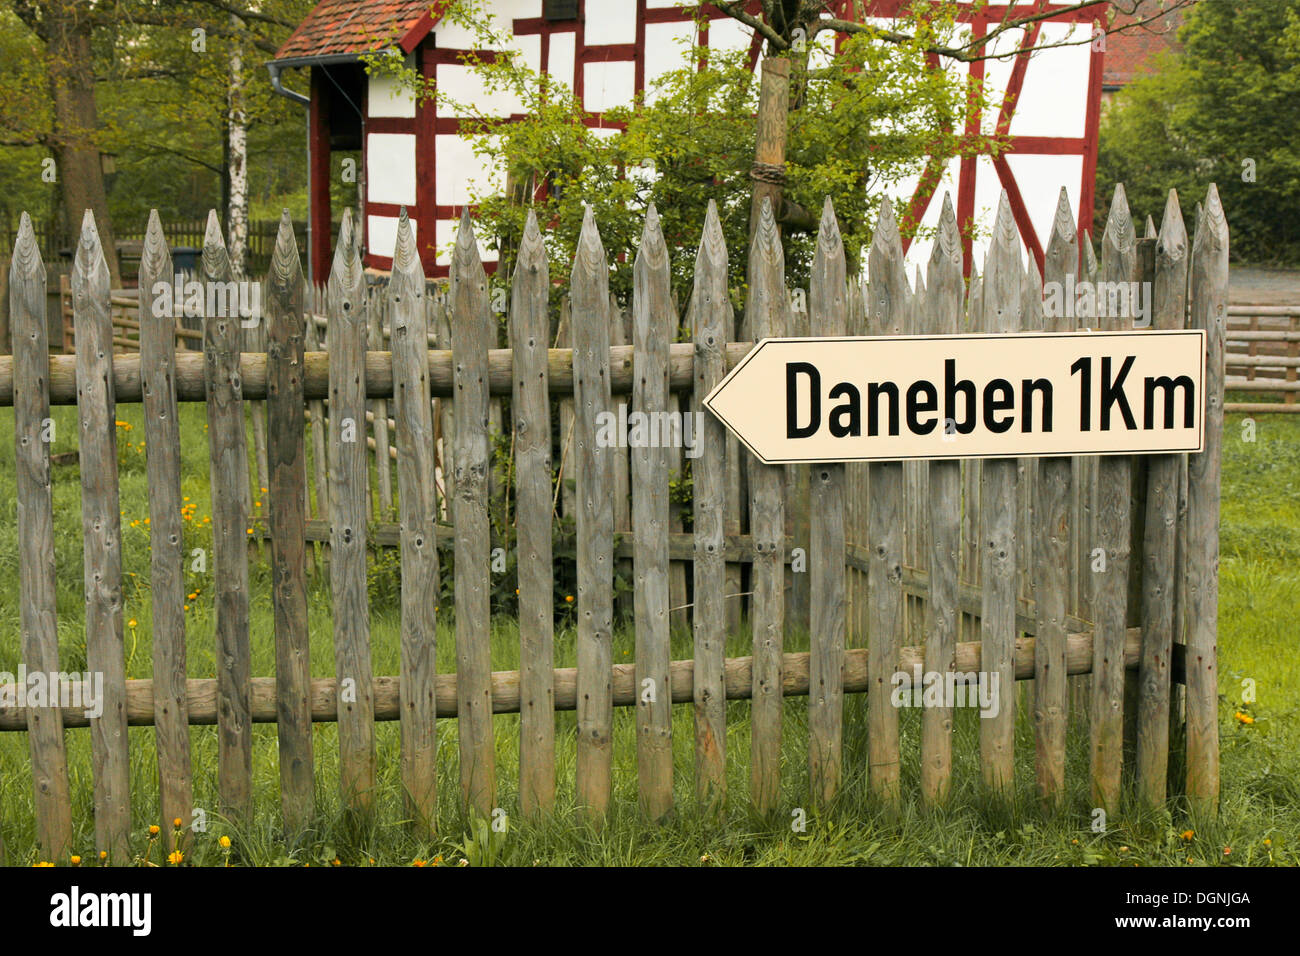 Town sign 'Daneben' 1 km, German for 'off the mark' or 'off target', funny road sign, Freilichtmuseum Hessenpark open-air museum Stock Photo